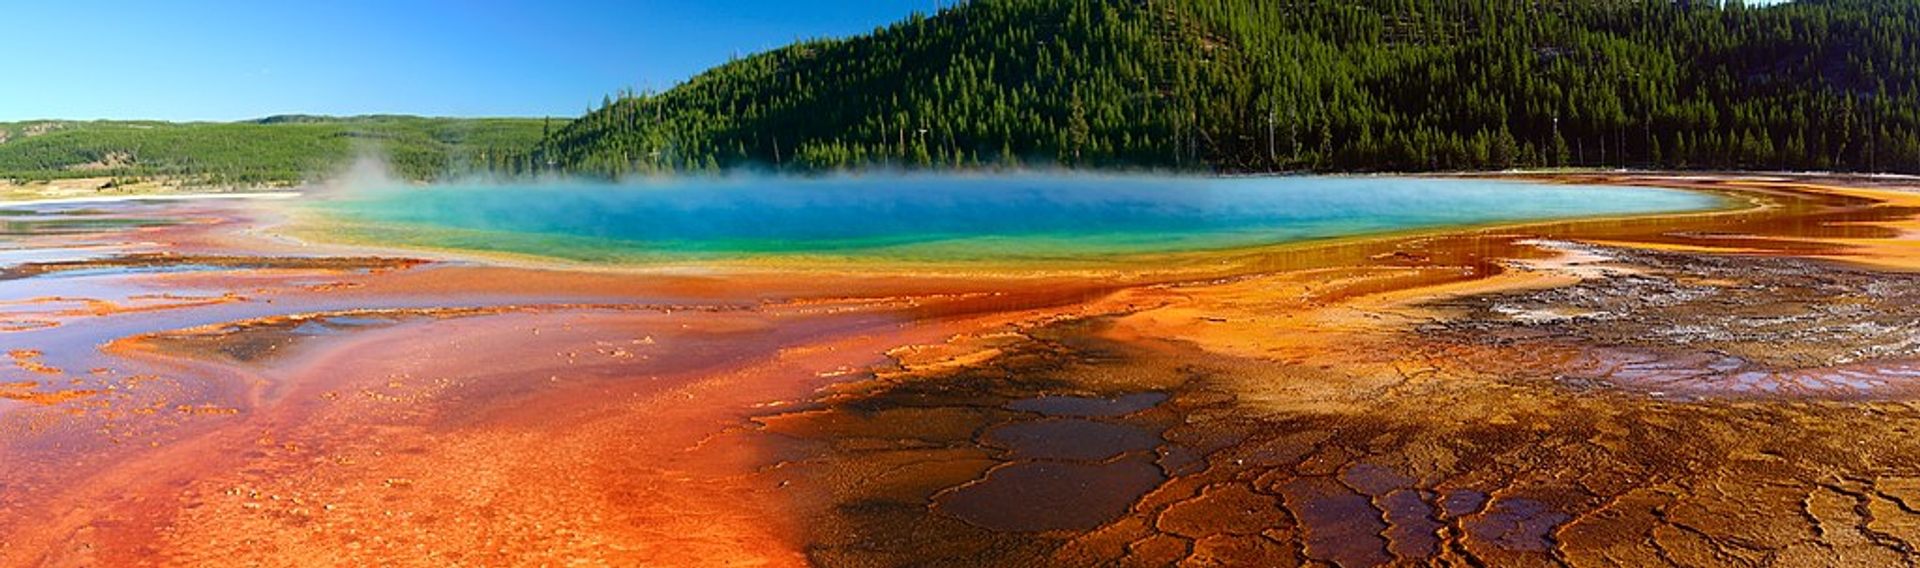 1024px-Grand_Prismatic_Spring,_Yellowstone_NP,_from_the_boardwalk